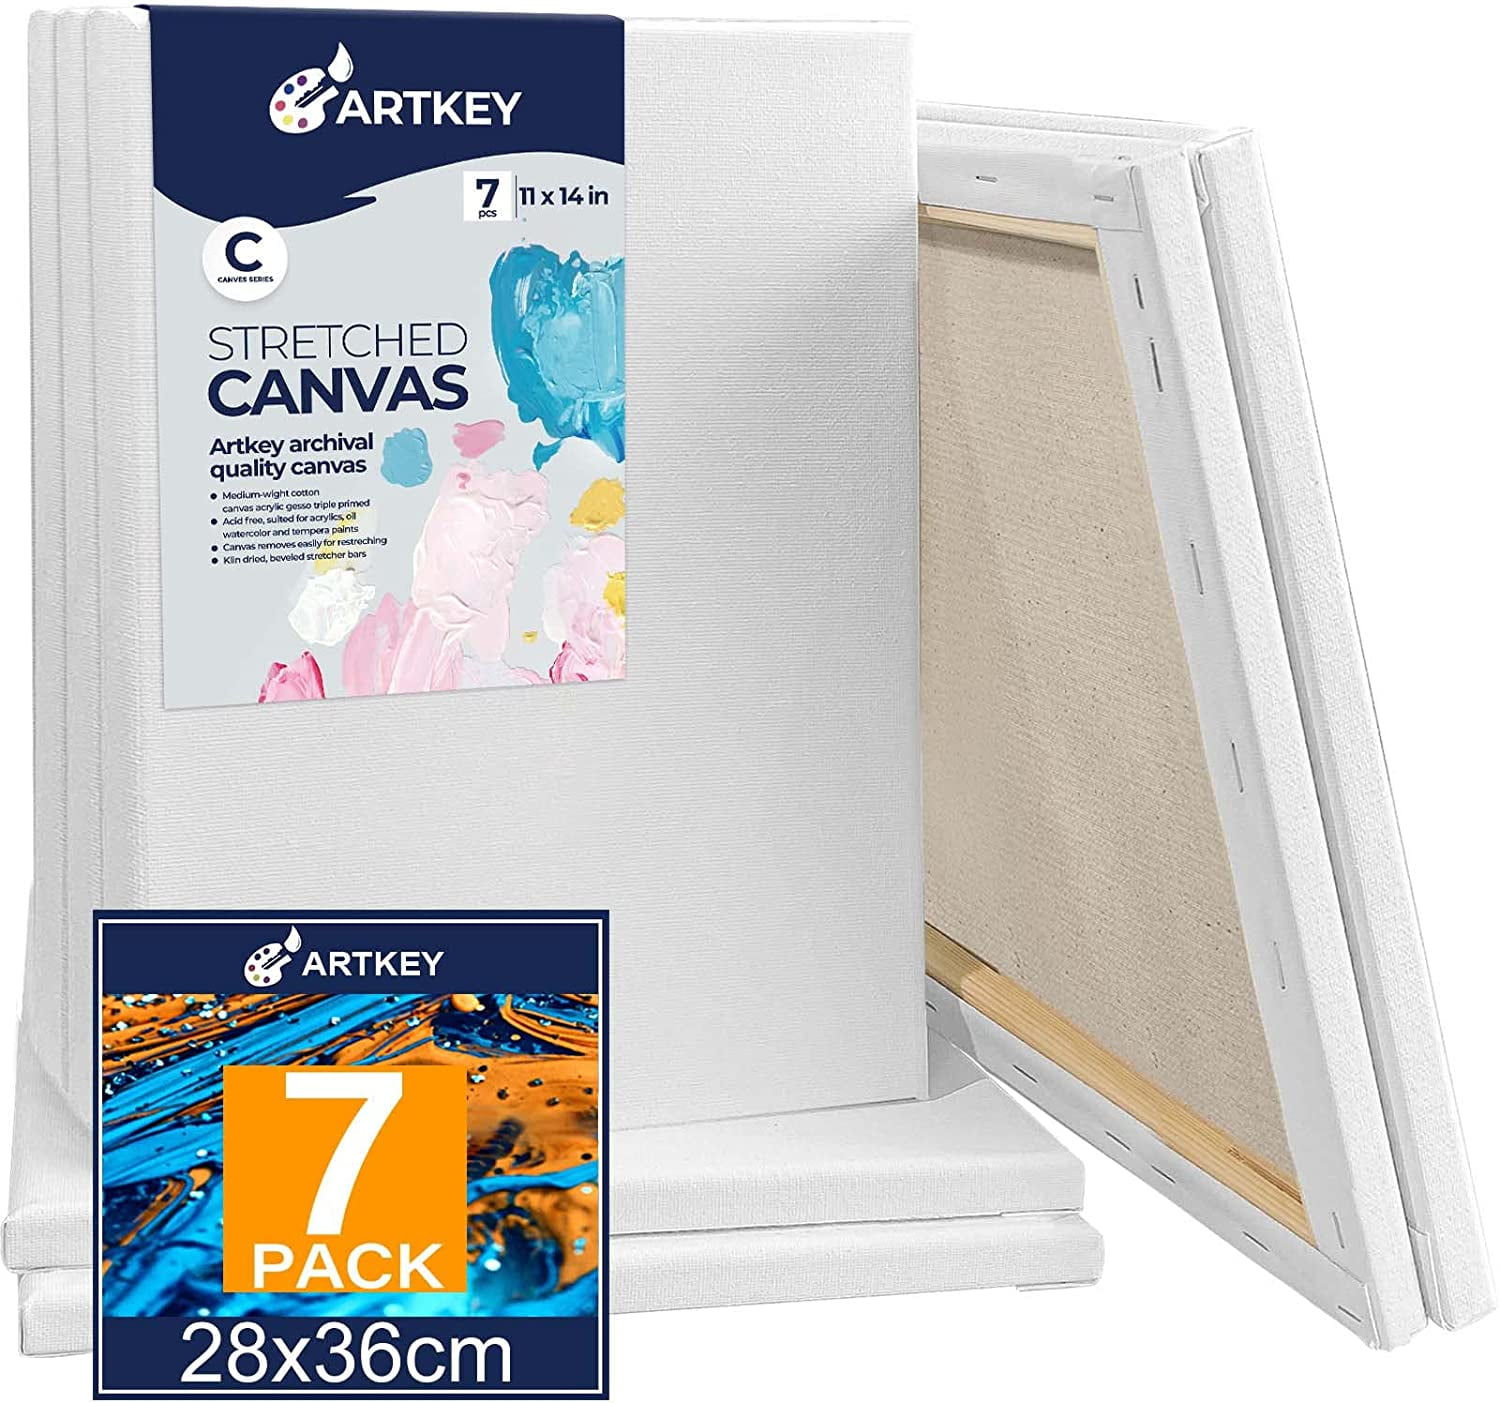 PHOENIX Stretched Canvas for Painting 11x14 Inch/7 Value Pack, 8 Oz Triple  Primed 5/8 Inch Profile 100% Cotton White Blank Canvas, Artist Framed